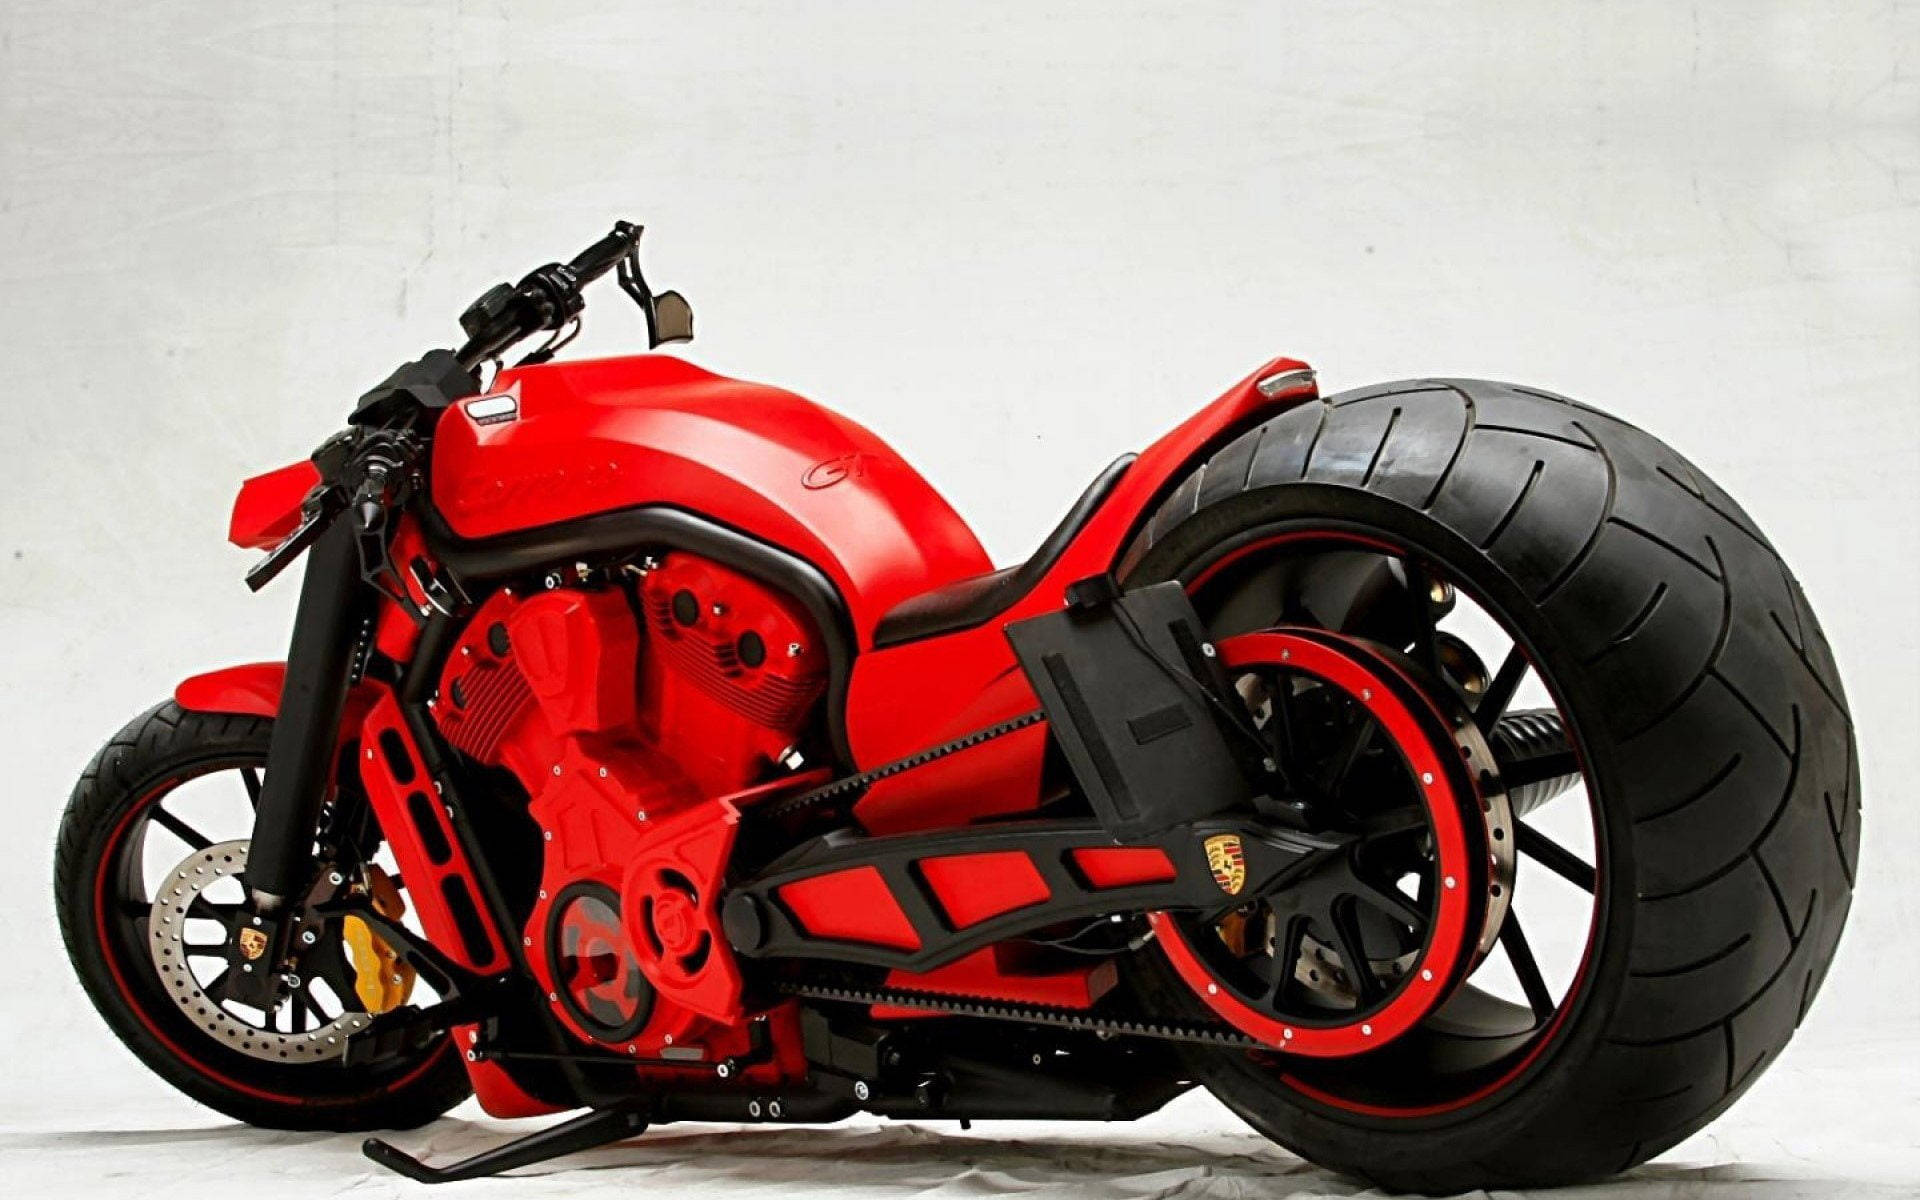 Tuned-up Bobber Motorcycle Wallpaper